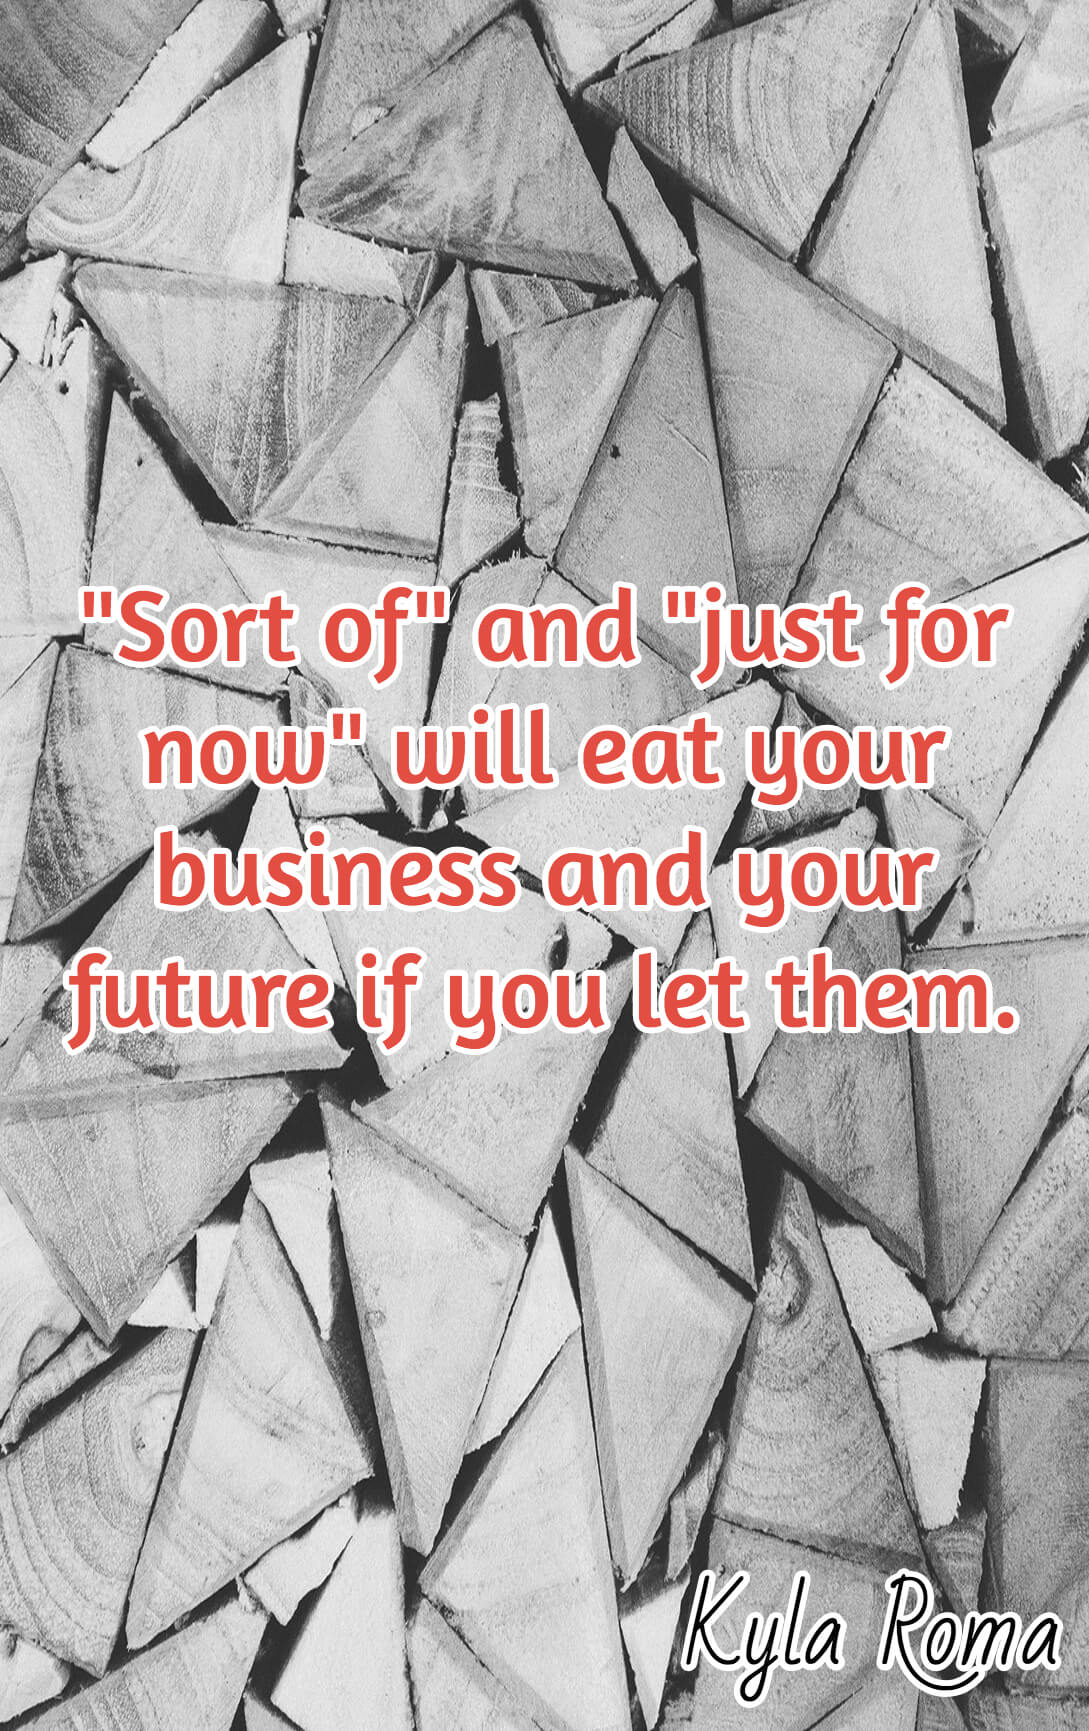 A sort of and just for now mentality will eat away at your business and your future if you let them. Kyla Roma